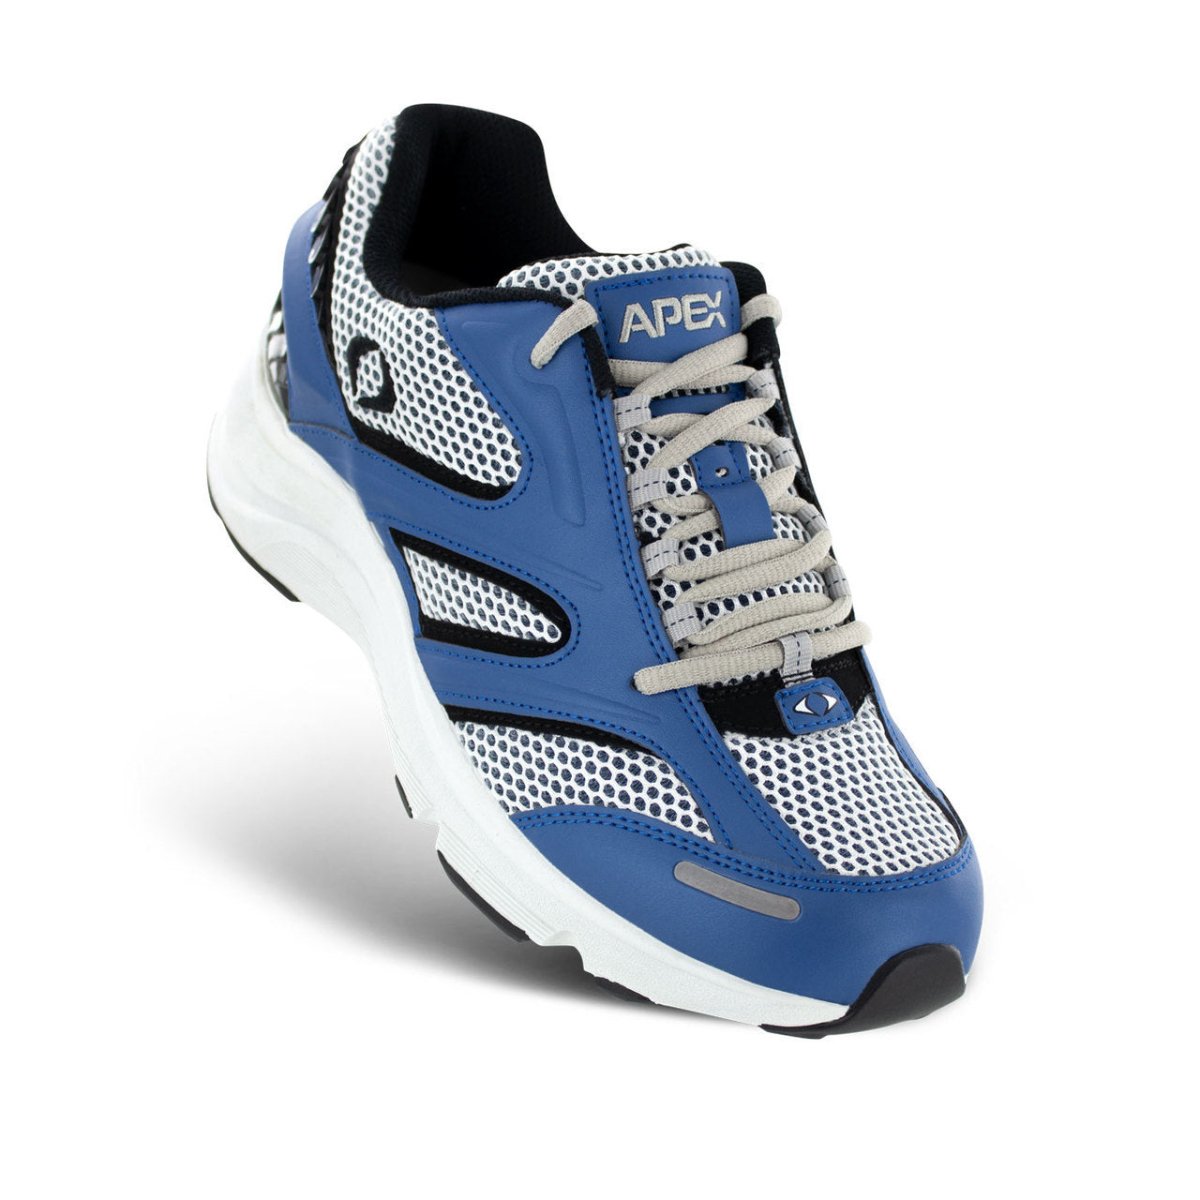 APEX V551 RUNNING AND WALKING MEN'S SHOE IN WHITE/BLUE - TLW Shoes